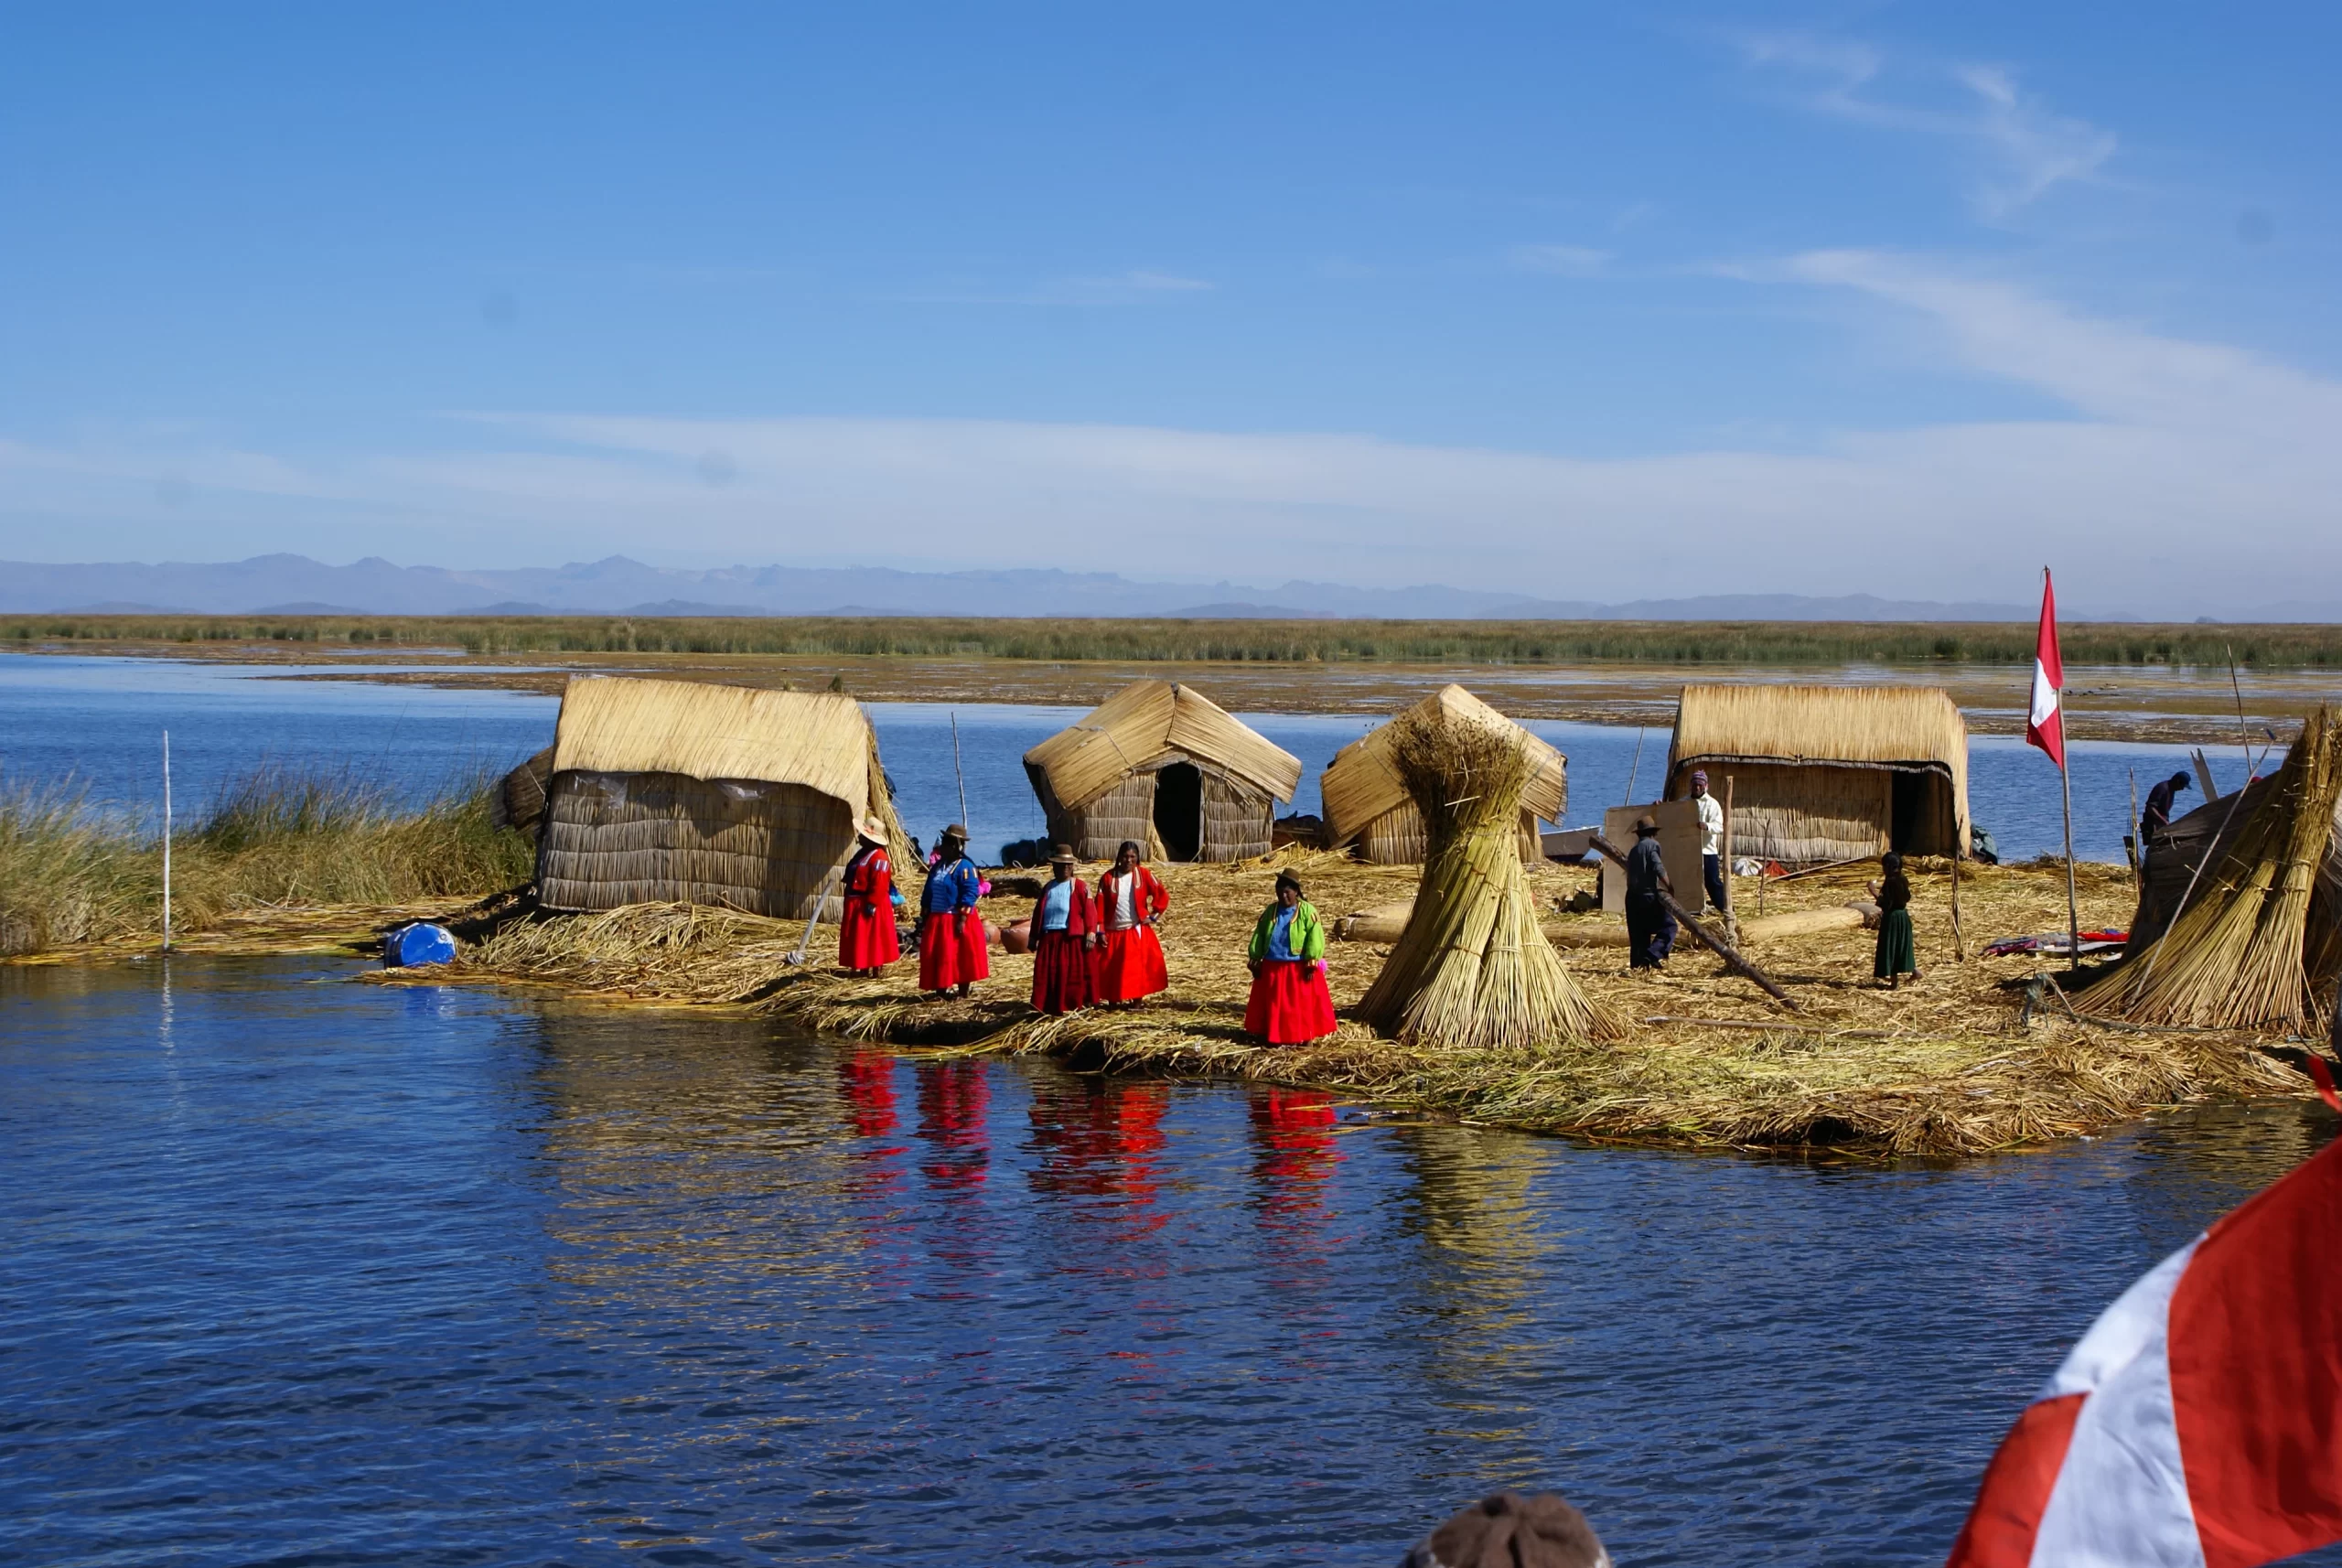 Isla flotante de los Uros scaled - Lake Titicaca - Peru's largest and most mysterious lake